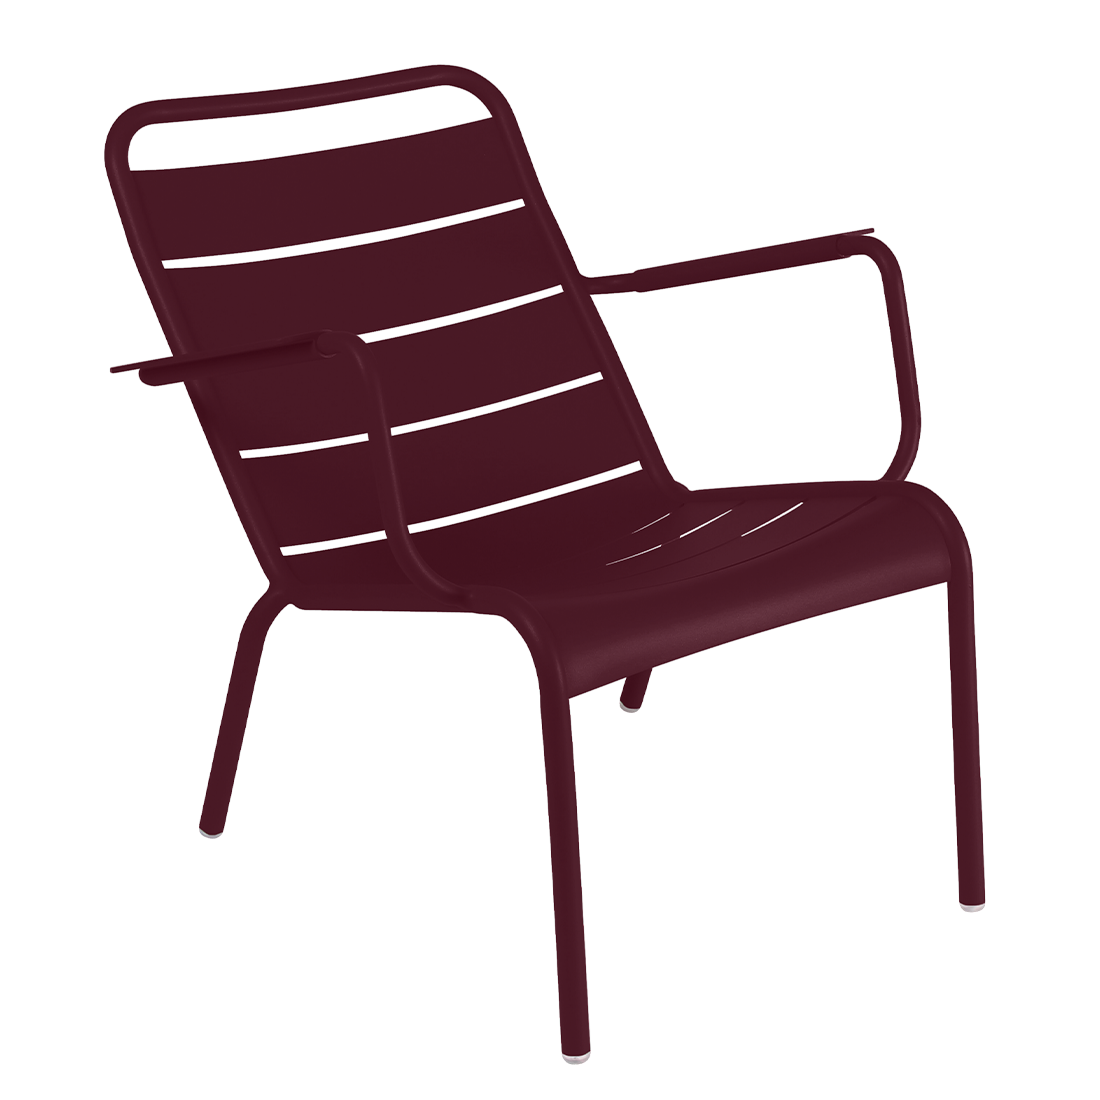 LUXEMBOURG STEEL LOW ARMCHAIR (Exc. Cont.)